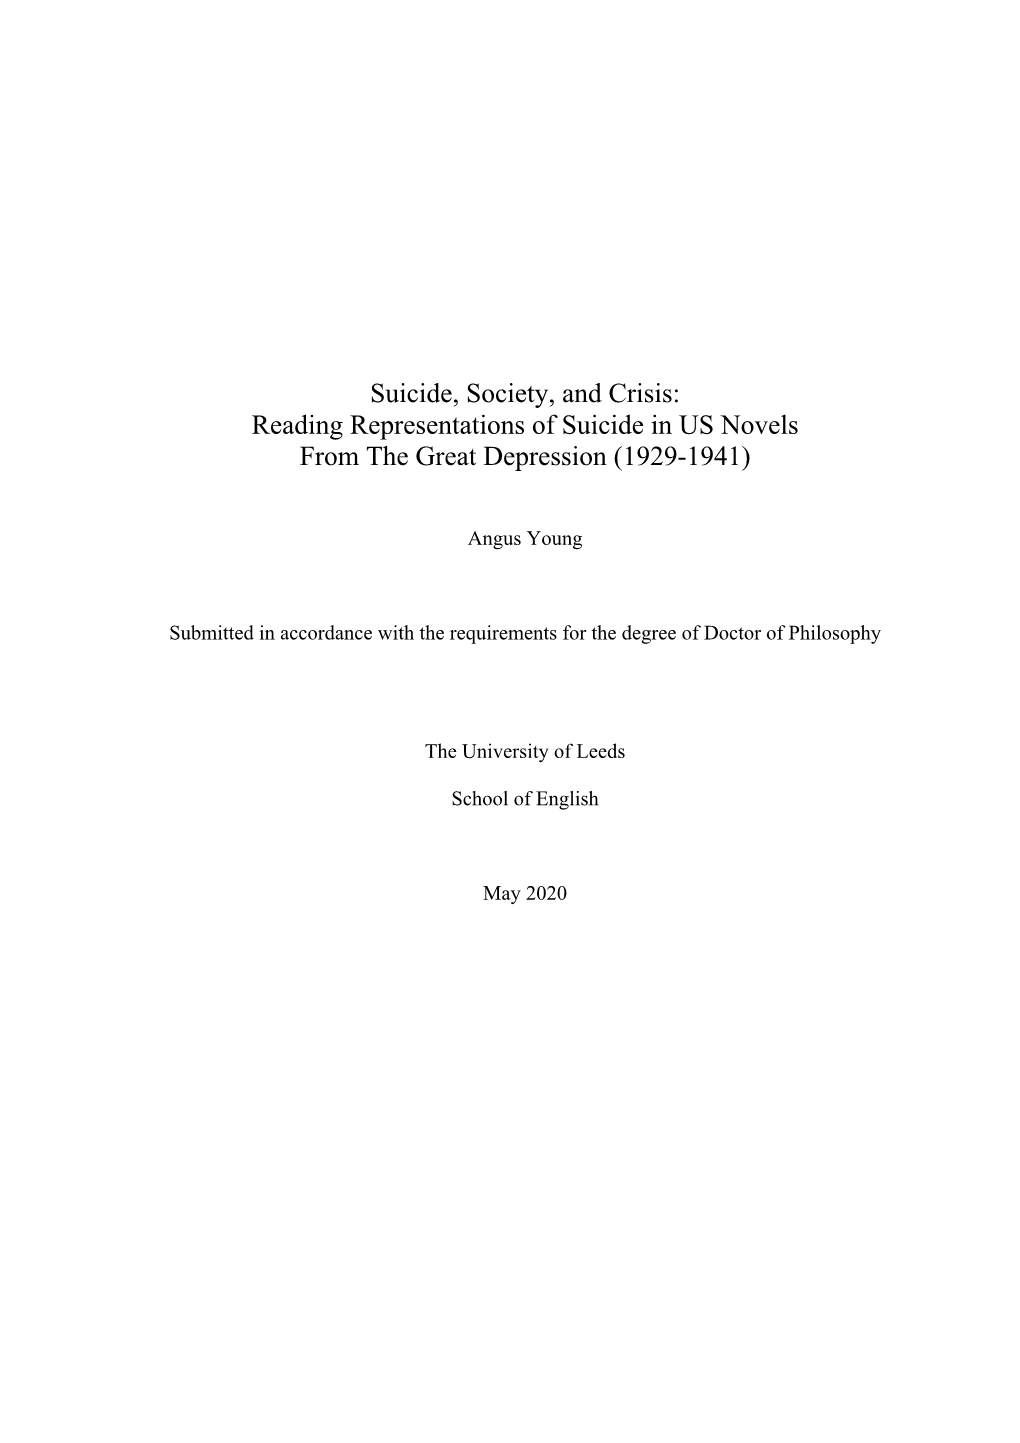 Reading Representations of Suicide in US Novels from the Great Depression (1929-1941)